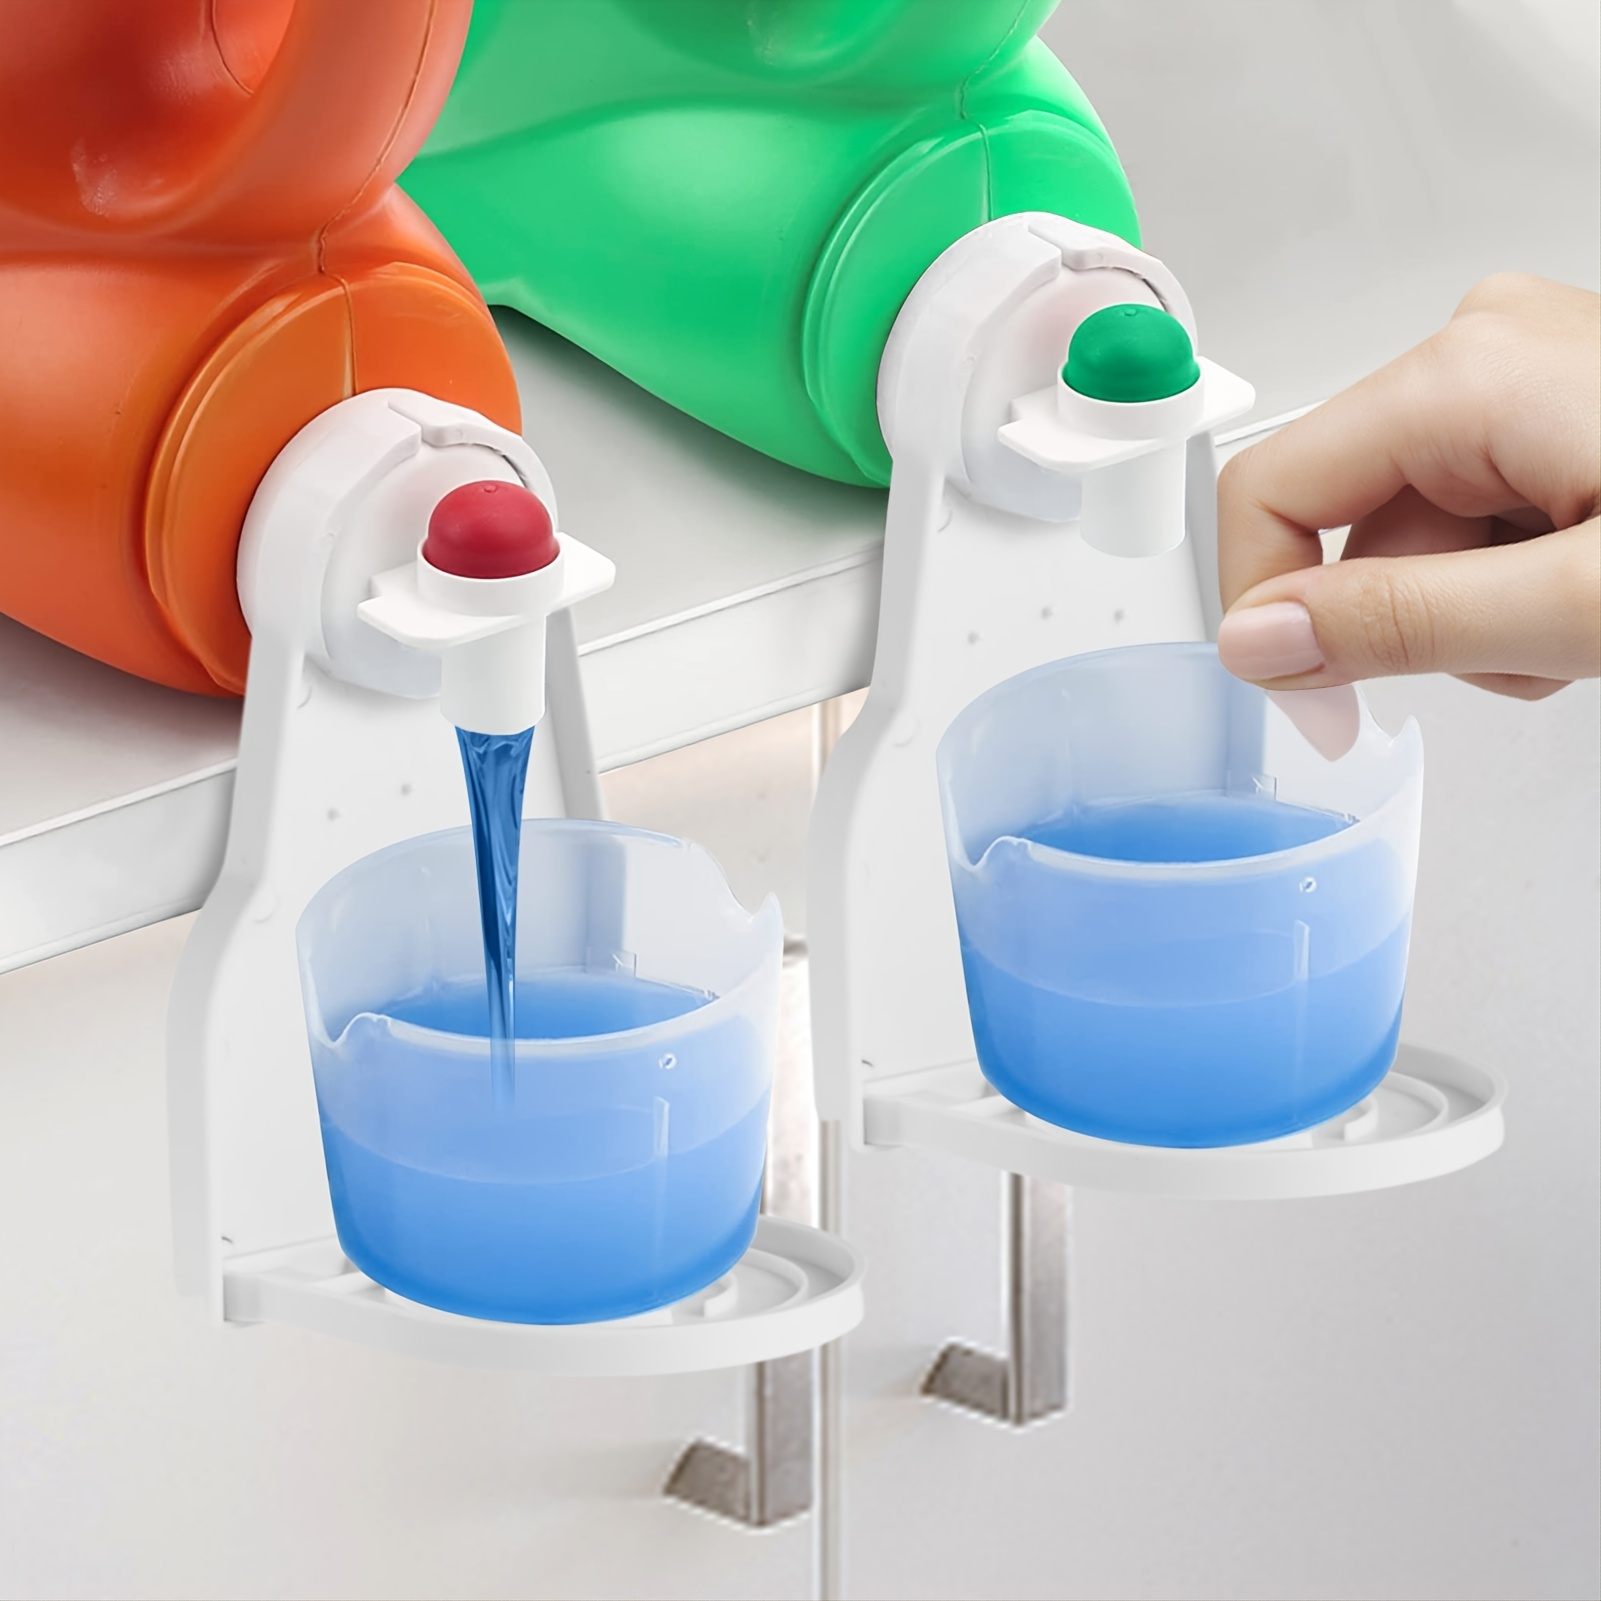 

1pc 5.9x3.5x3inch Laundry Detergent Cup Holder, block Spills And Drips, Foldable Laundry Fabric Softener Cup Holder Drip Tray Catcher